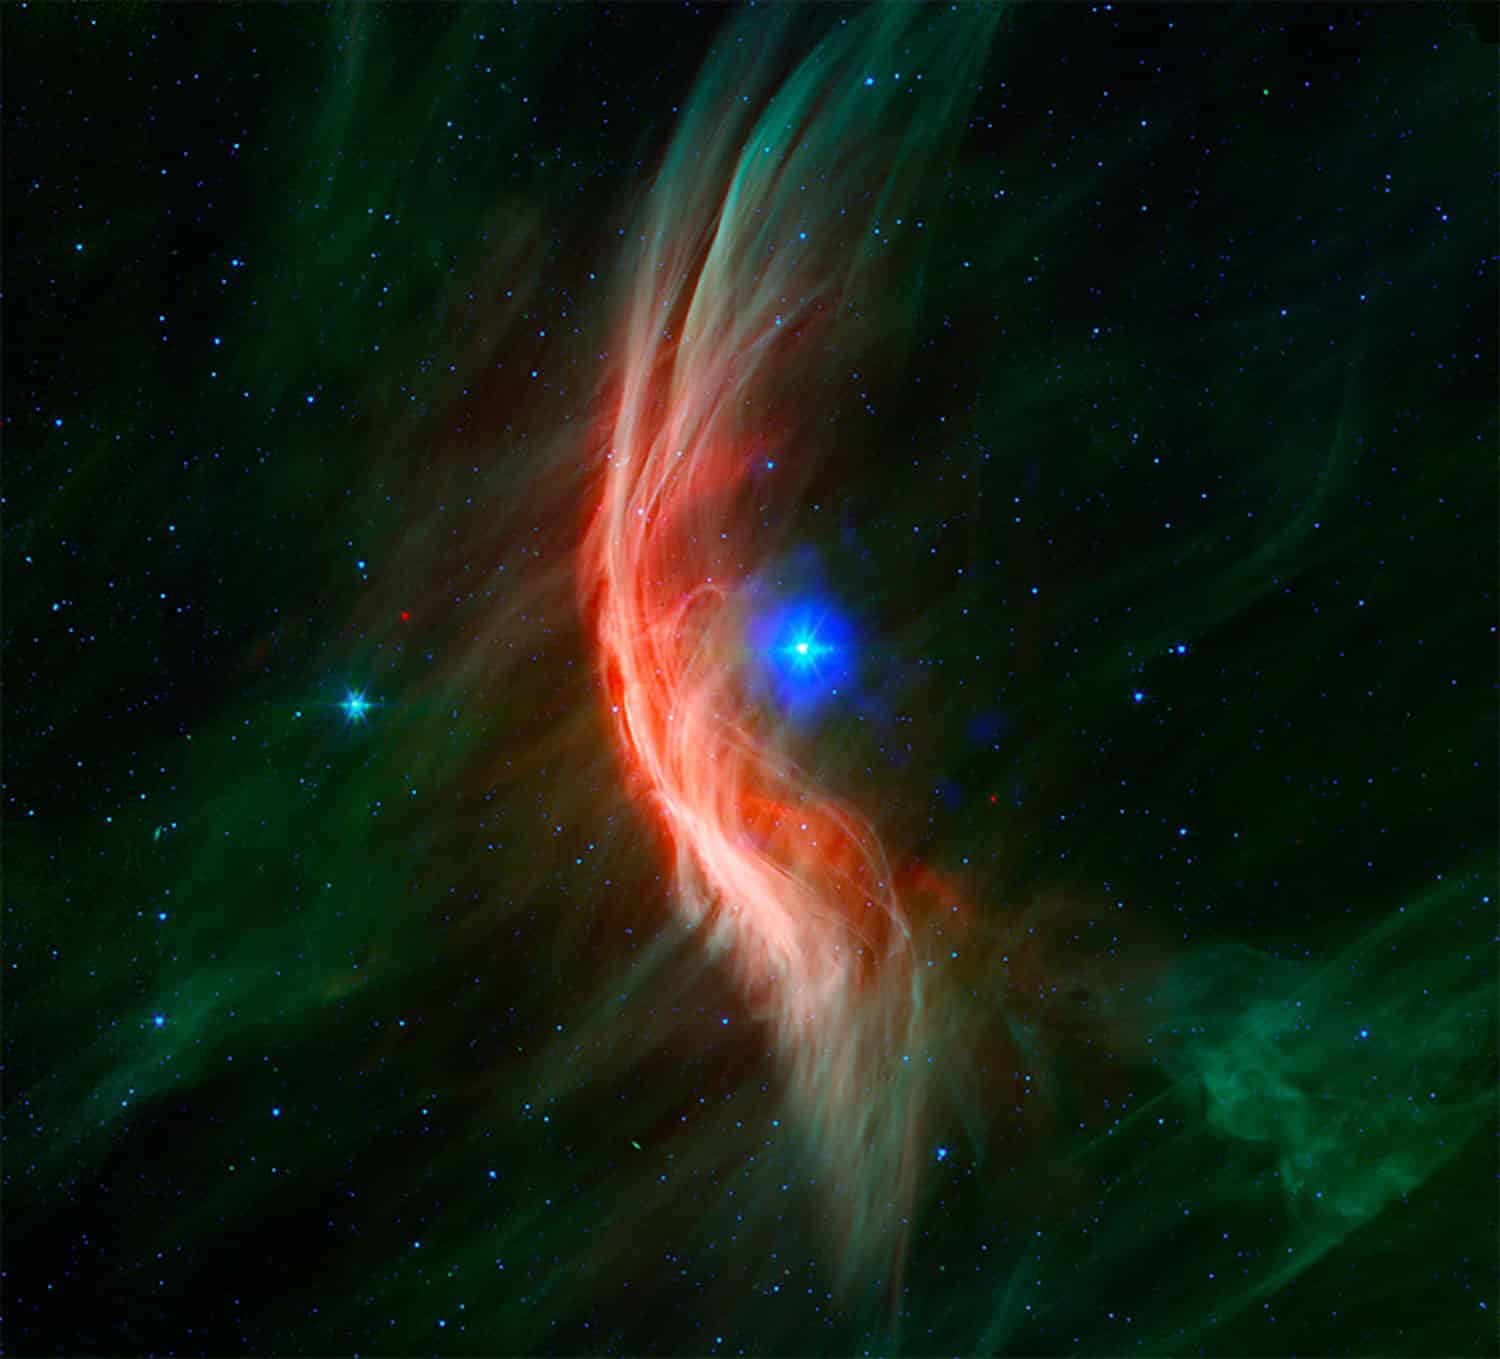 NASA Chandra sees the catastrophic past of the Zeta Ophiuchi star